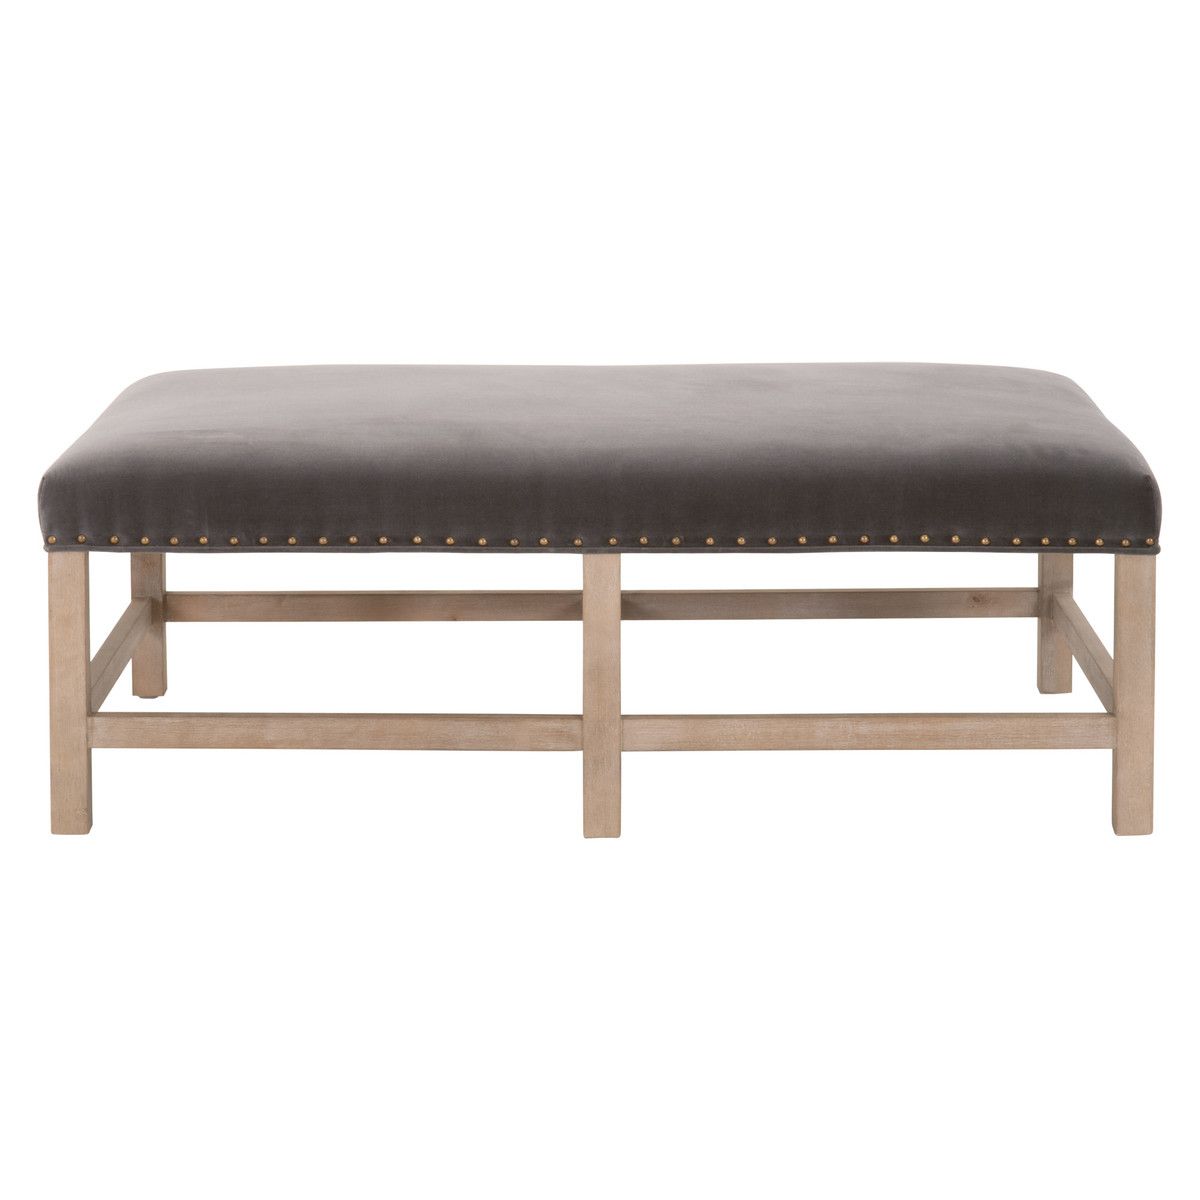 Blakely Upholstered Coffee Table | Scout & Nimble